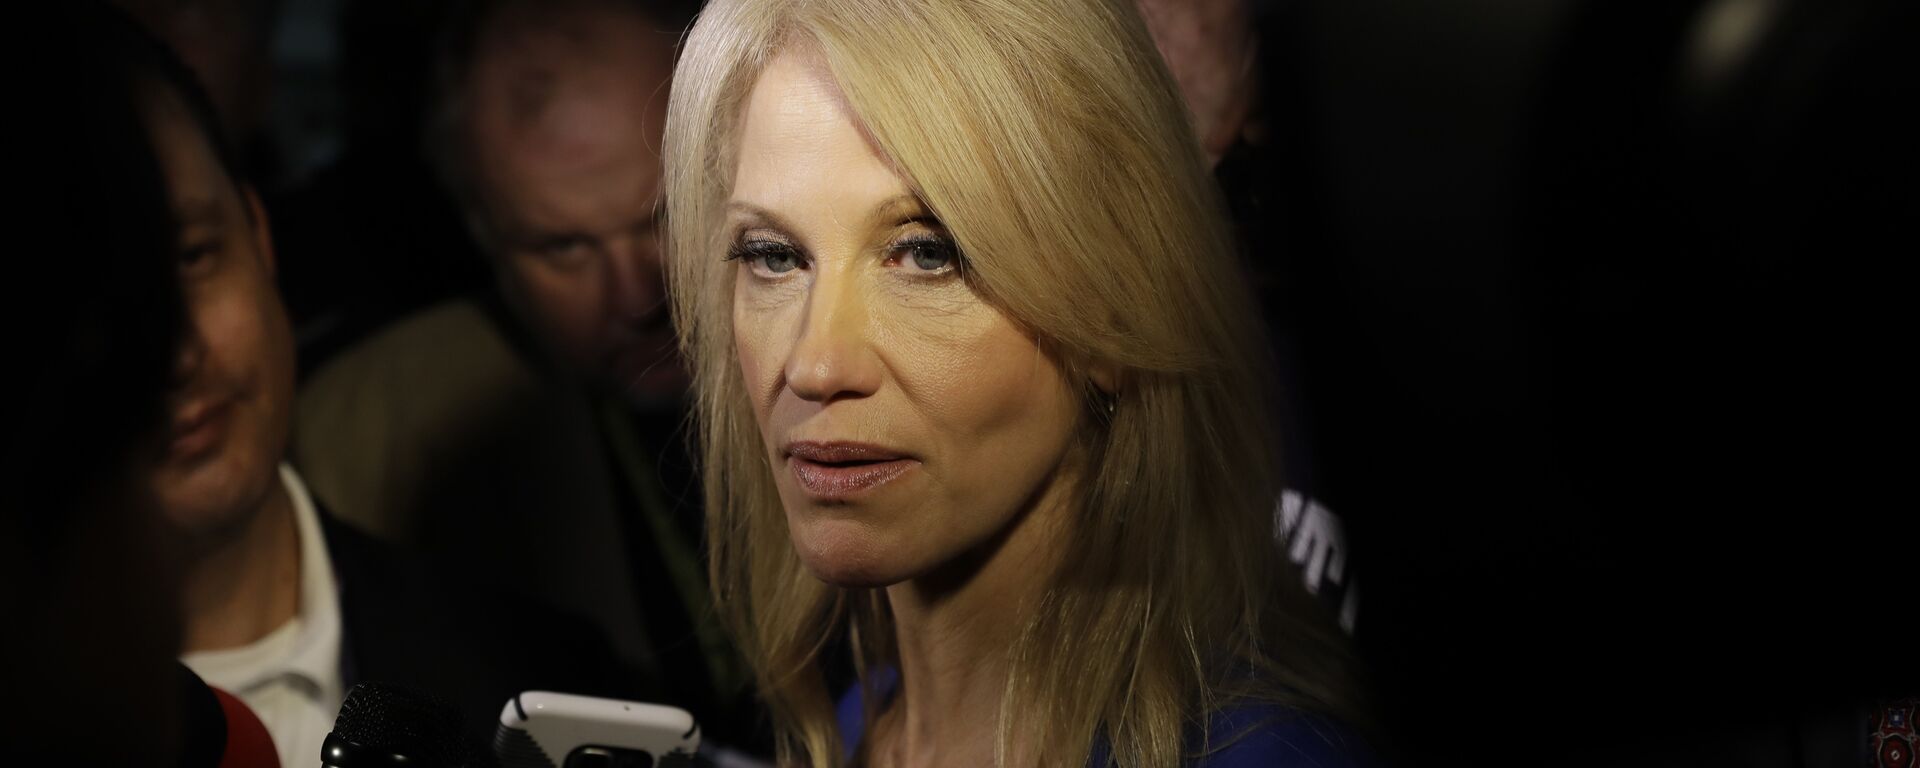 Kellyanne Conway, campaign manager for Republican presidential candidate Donald Trump, speaks with reporters after a speech by Melania Trump at the Main Line Sports Center in Berwyn, Pa., Thursday, Nov. 3, 2016 - Sputnik International, 1920, 09.09.2021